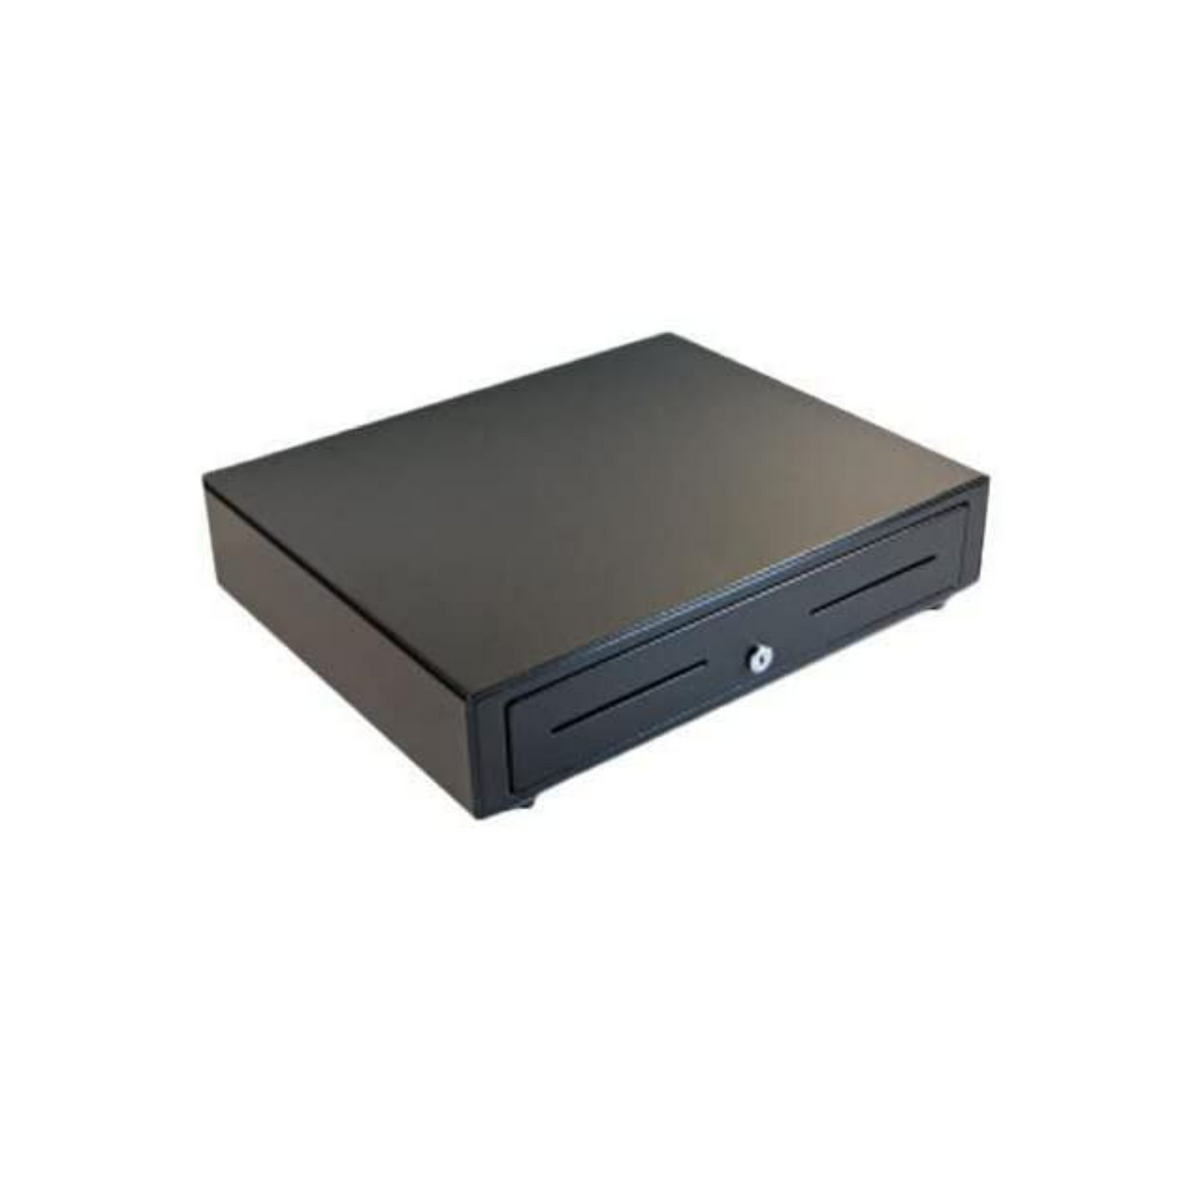 APG, Cash Drawer, USB Pro, Black, 16x16, 4 Bill x 8 Coin, Cable Included